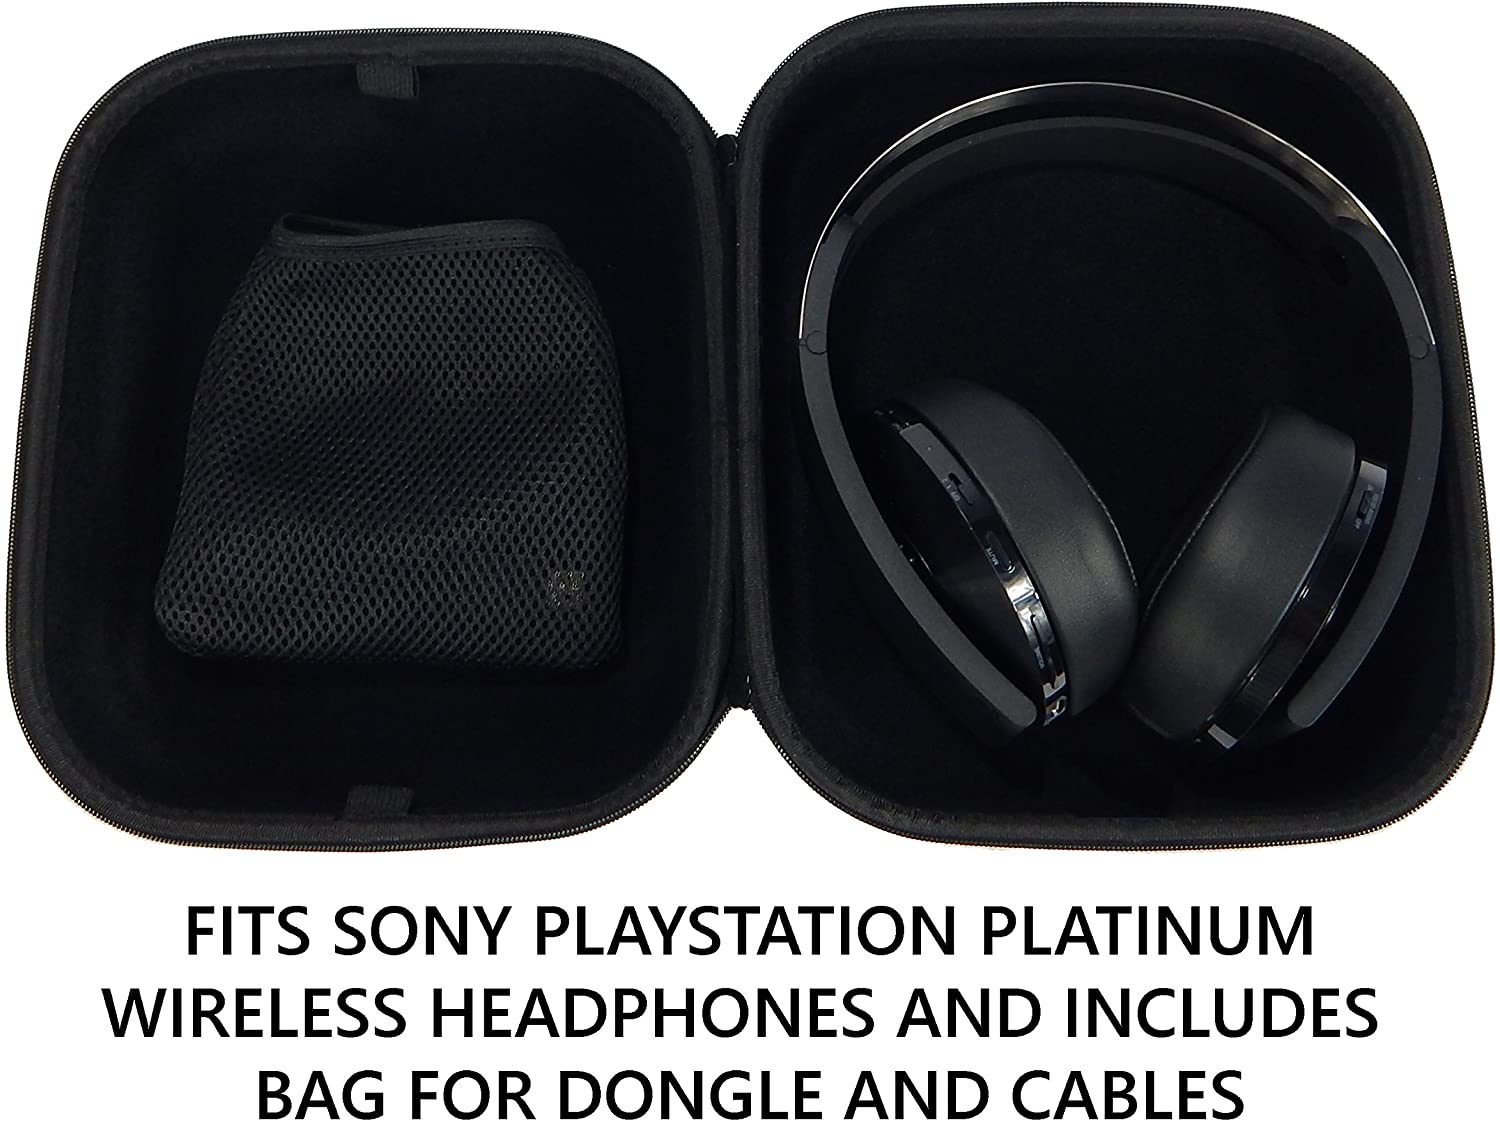 CASEMATIX Gaming Headset Compatible with PS5 Pulse 3D Wireless Headset, Platinum Wireless Playstation Headset for PS4, Dongle, Cables and More | Lightweight & Affordable Hard Cases For Microphones, Guns, PS5s &